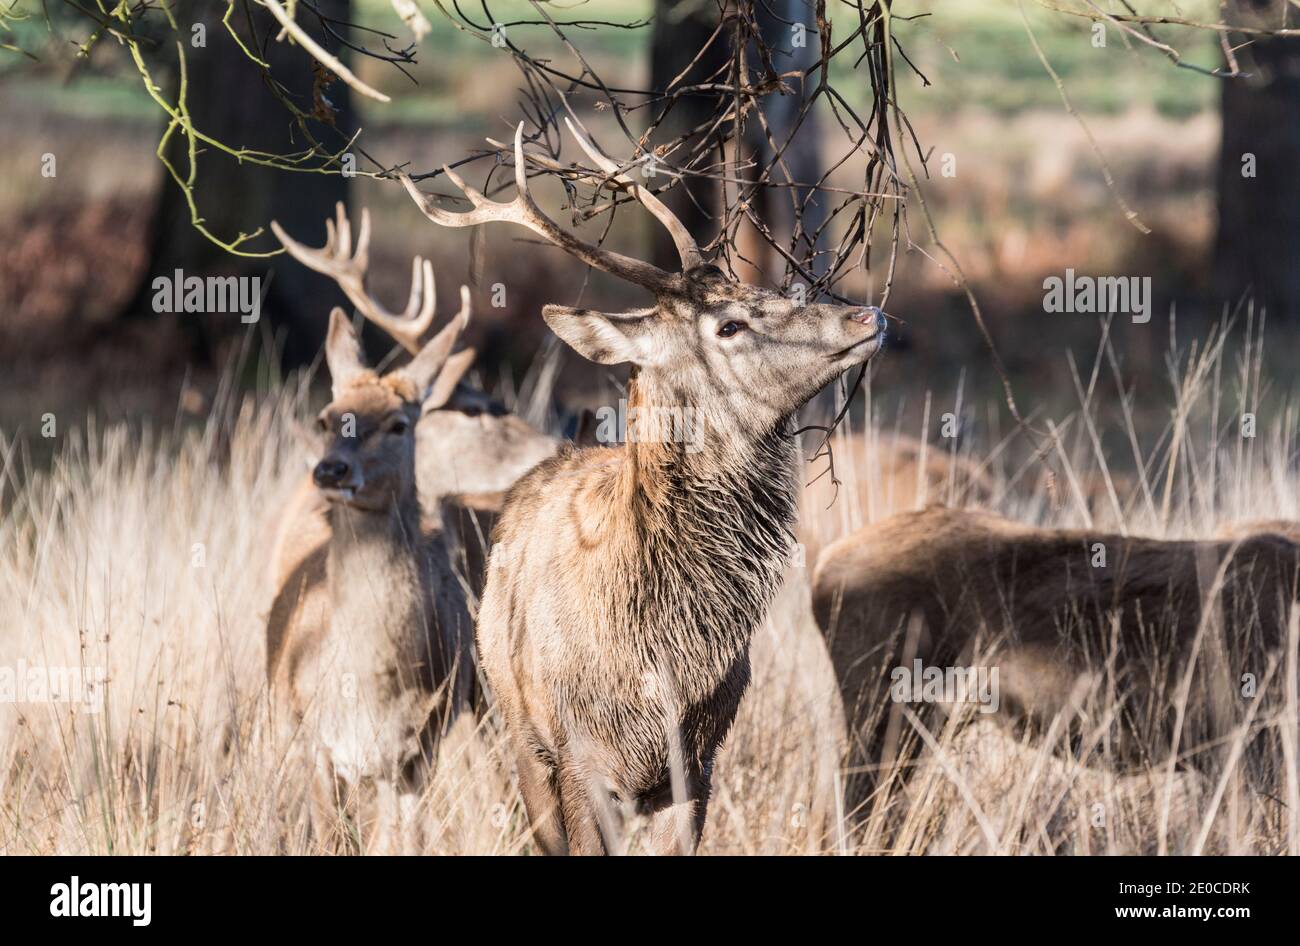 Reed Deer Stag with antlers caught in twigs Stock Photo